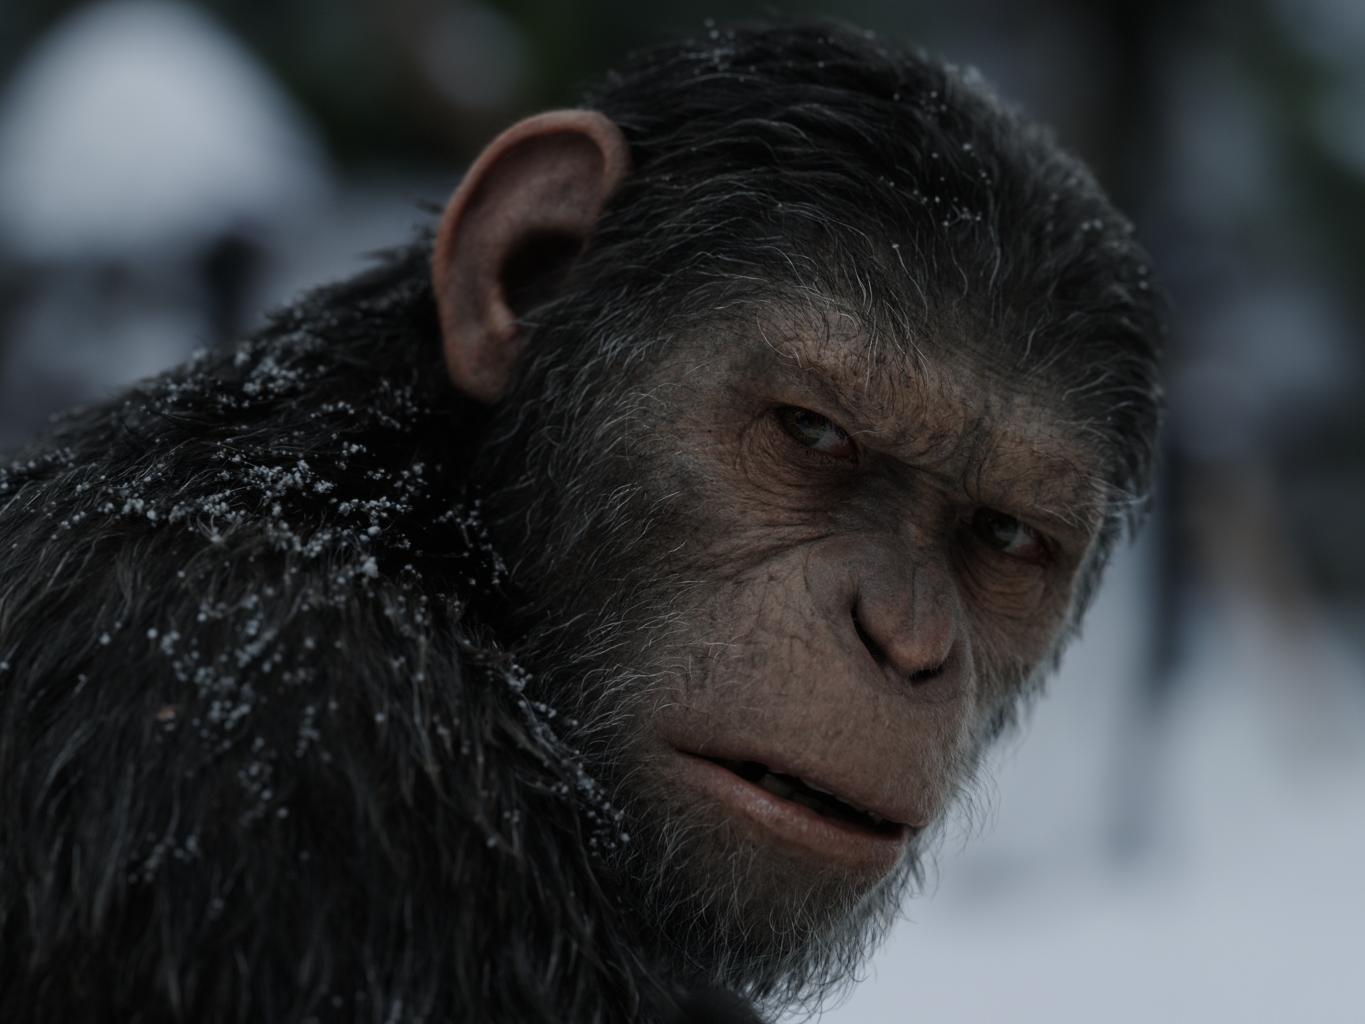 Planet of the Apes actor Andy Serkis a master of performance-capture